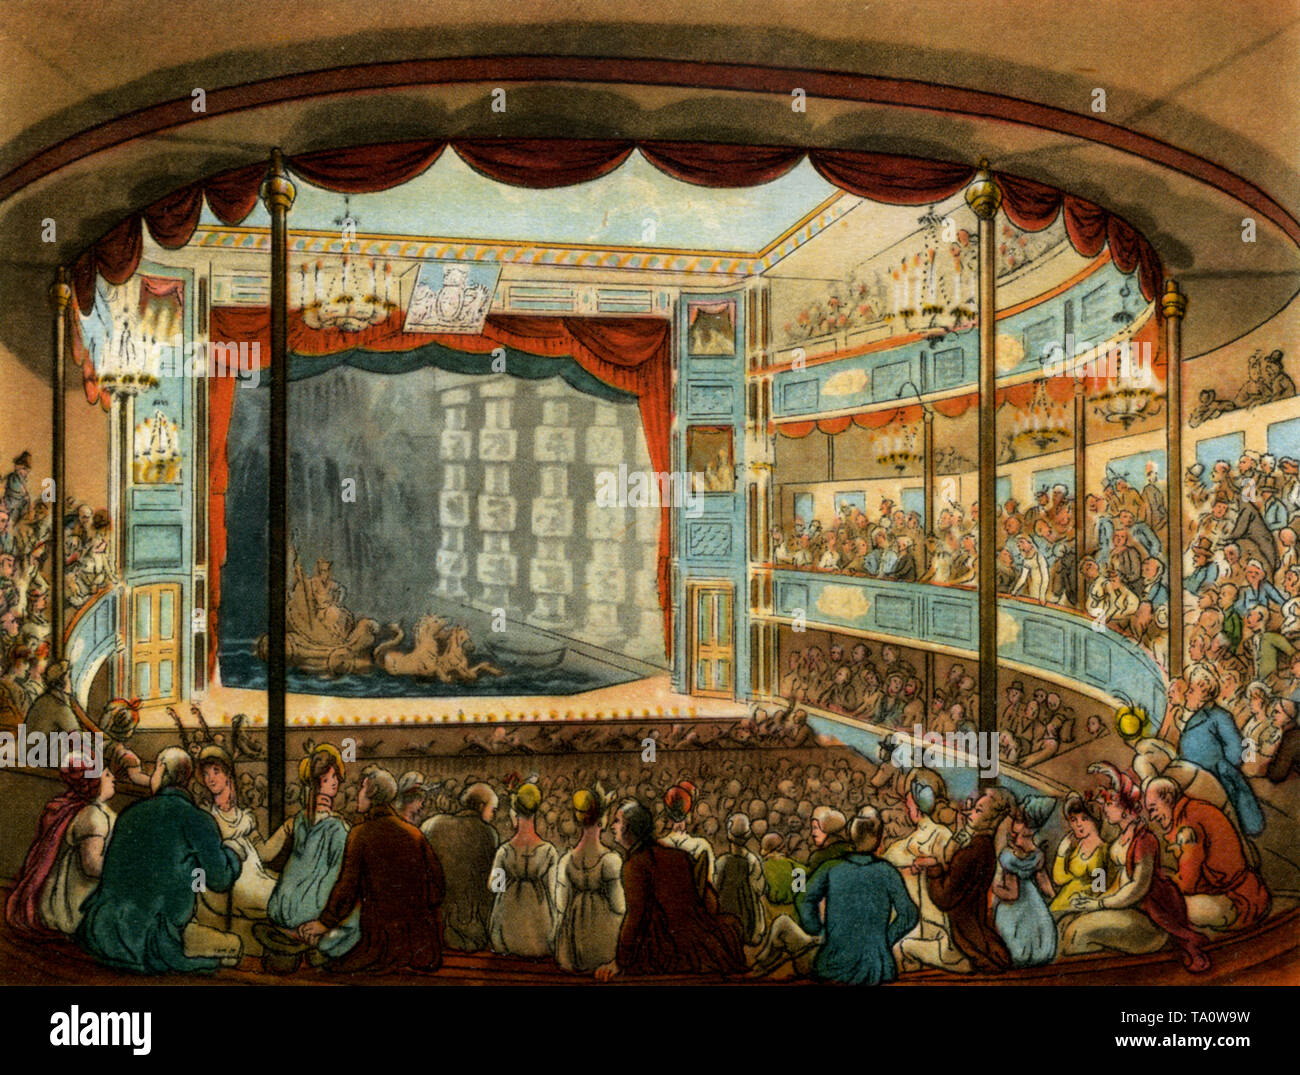 Sadler's Wells Theatre, c1808-1810. A print from 'The Microcosm of London', by William Henry Pyne (1770-1843). Illustrated by Thomas Rowlandson (1756-1827) and Auguste Charles Pugin (1762-1832). The magnificent auditorium of the former Sadler's Wells Theatre. Now famous as a venue for ballet we see it used here as an Aquatic Theatre. With the construction of a large tank, flooded from the nearby New River, an Aquatic Theatre was used to stage extravagant naval melodramas. Stock Photo